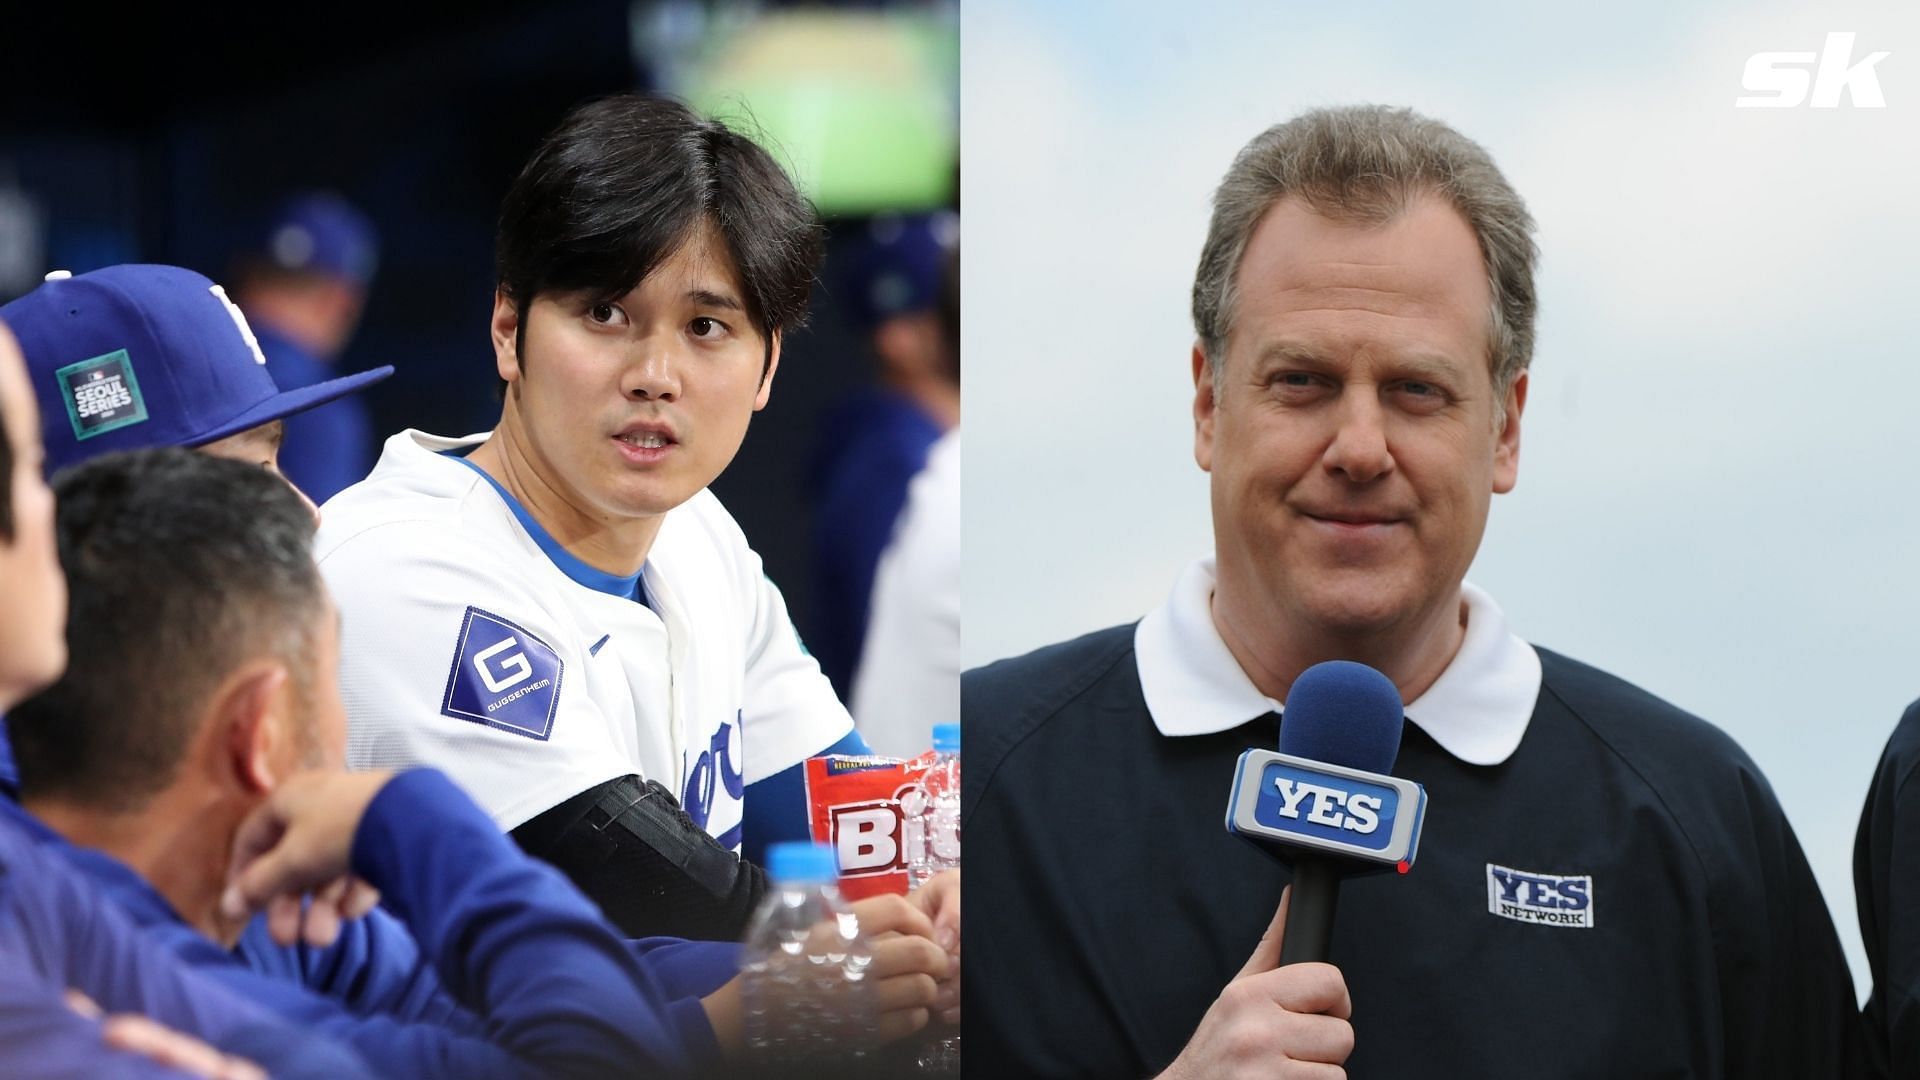 YES Network broadcaster Michael Kay believes that Shohei Ohtani should be banned from baseball if he did indeed gamble